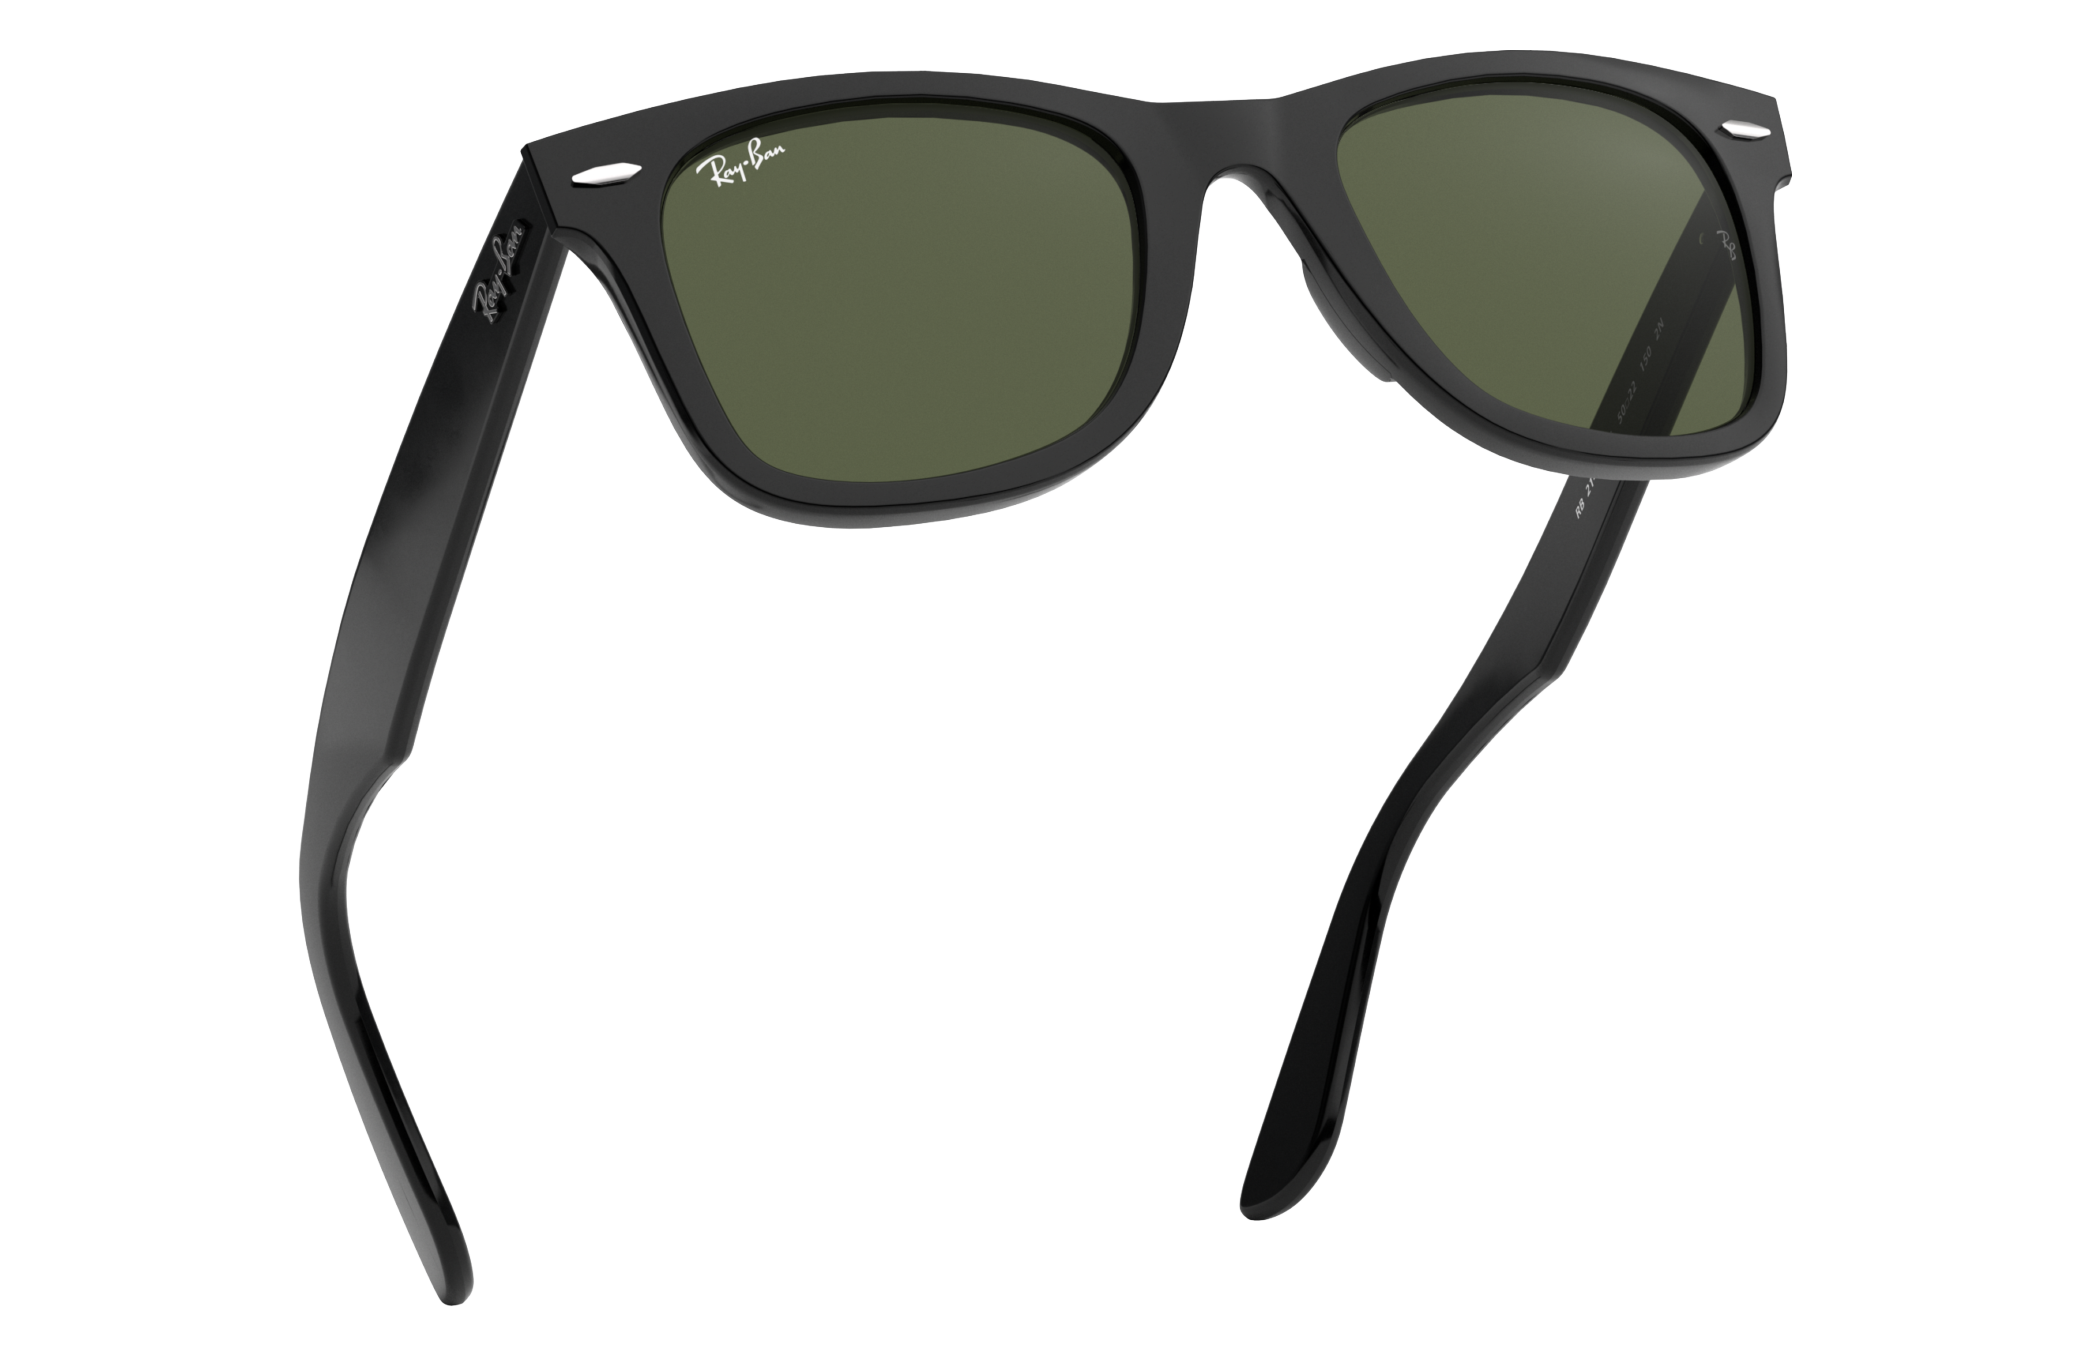 Are My Ray-Bans Real? | Replacement lenses, Ray bans, Sunglass lenses